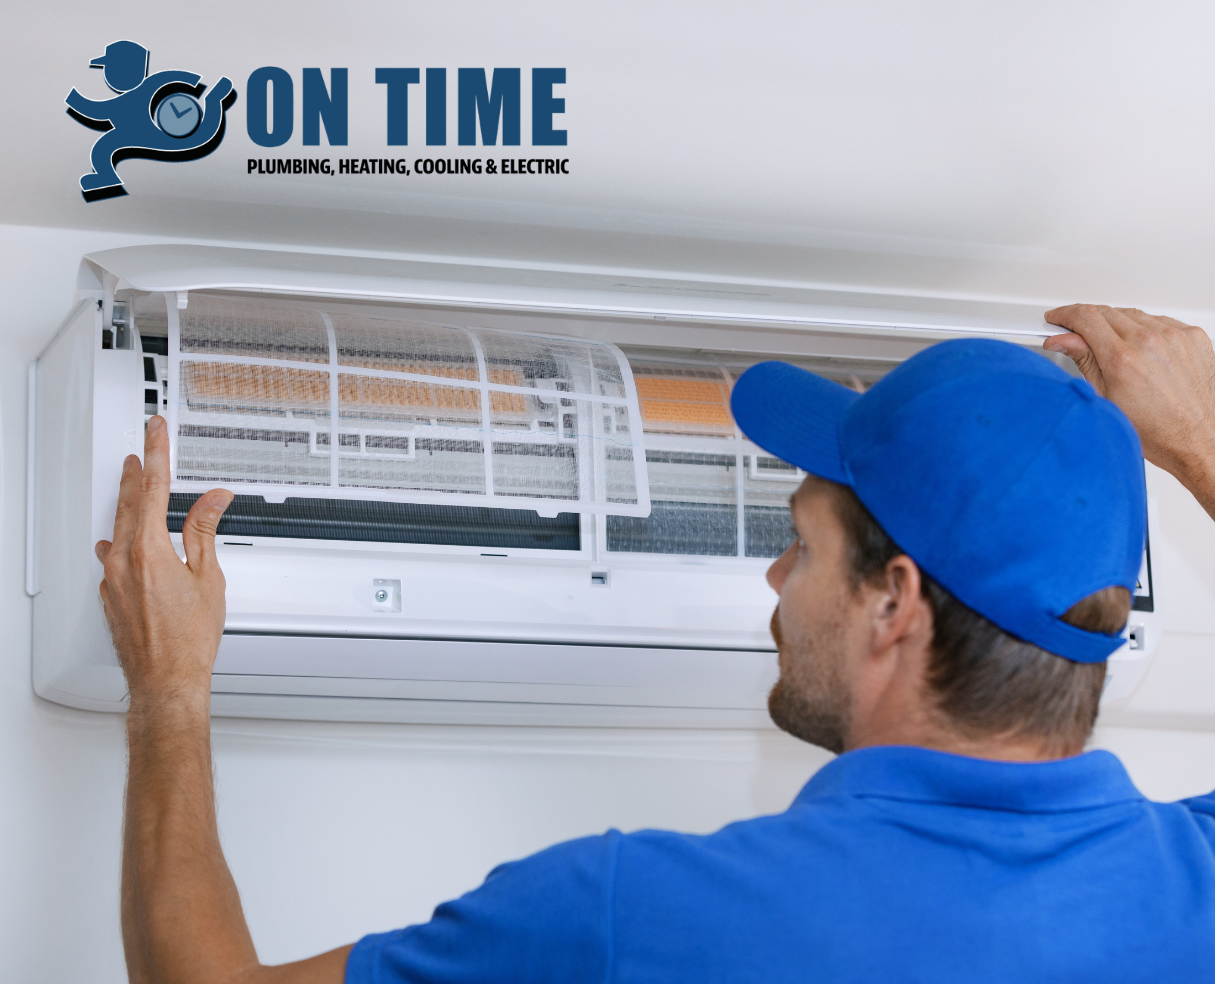 On Time Plumbing, Heating, Cooling & Electric